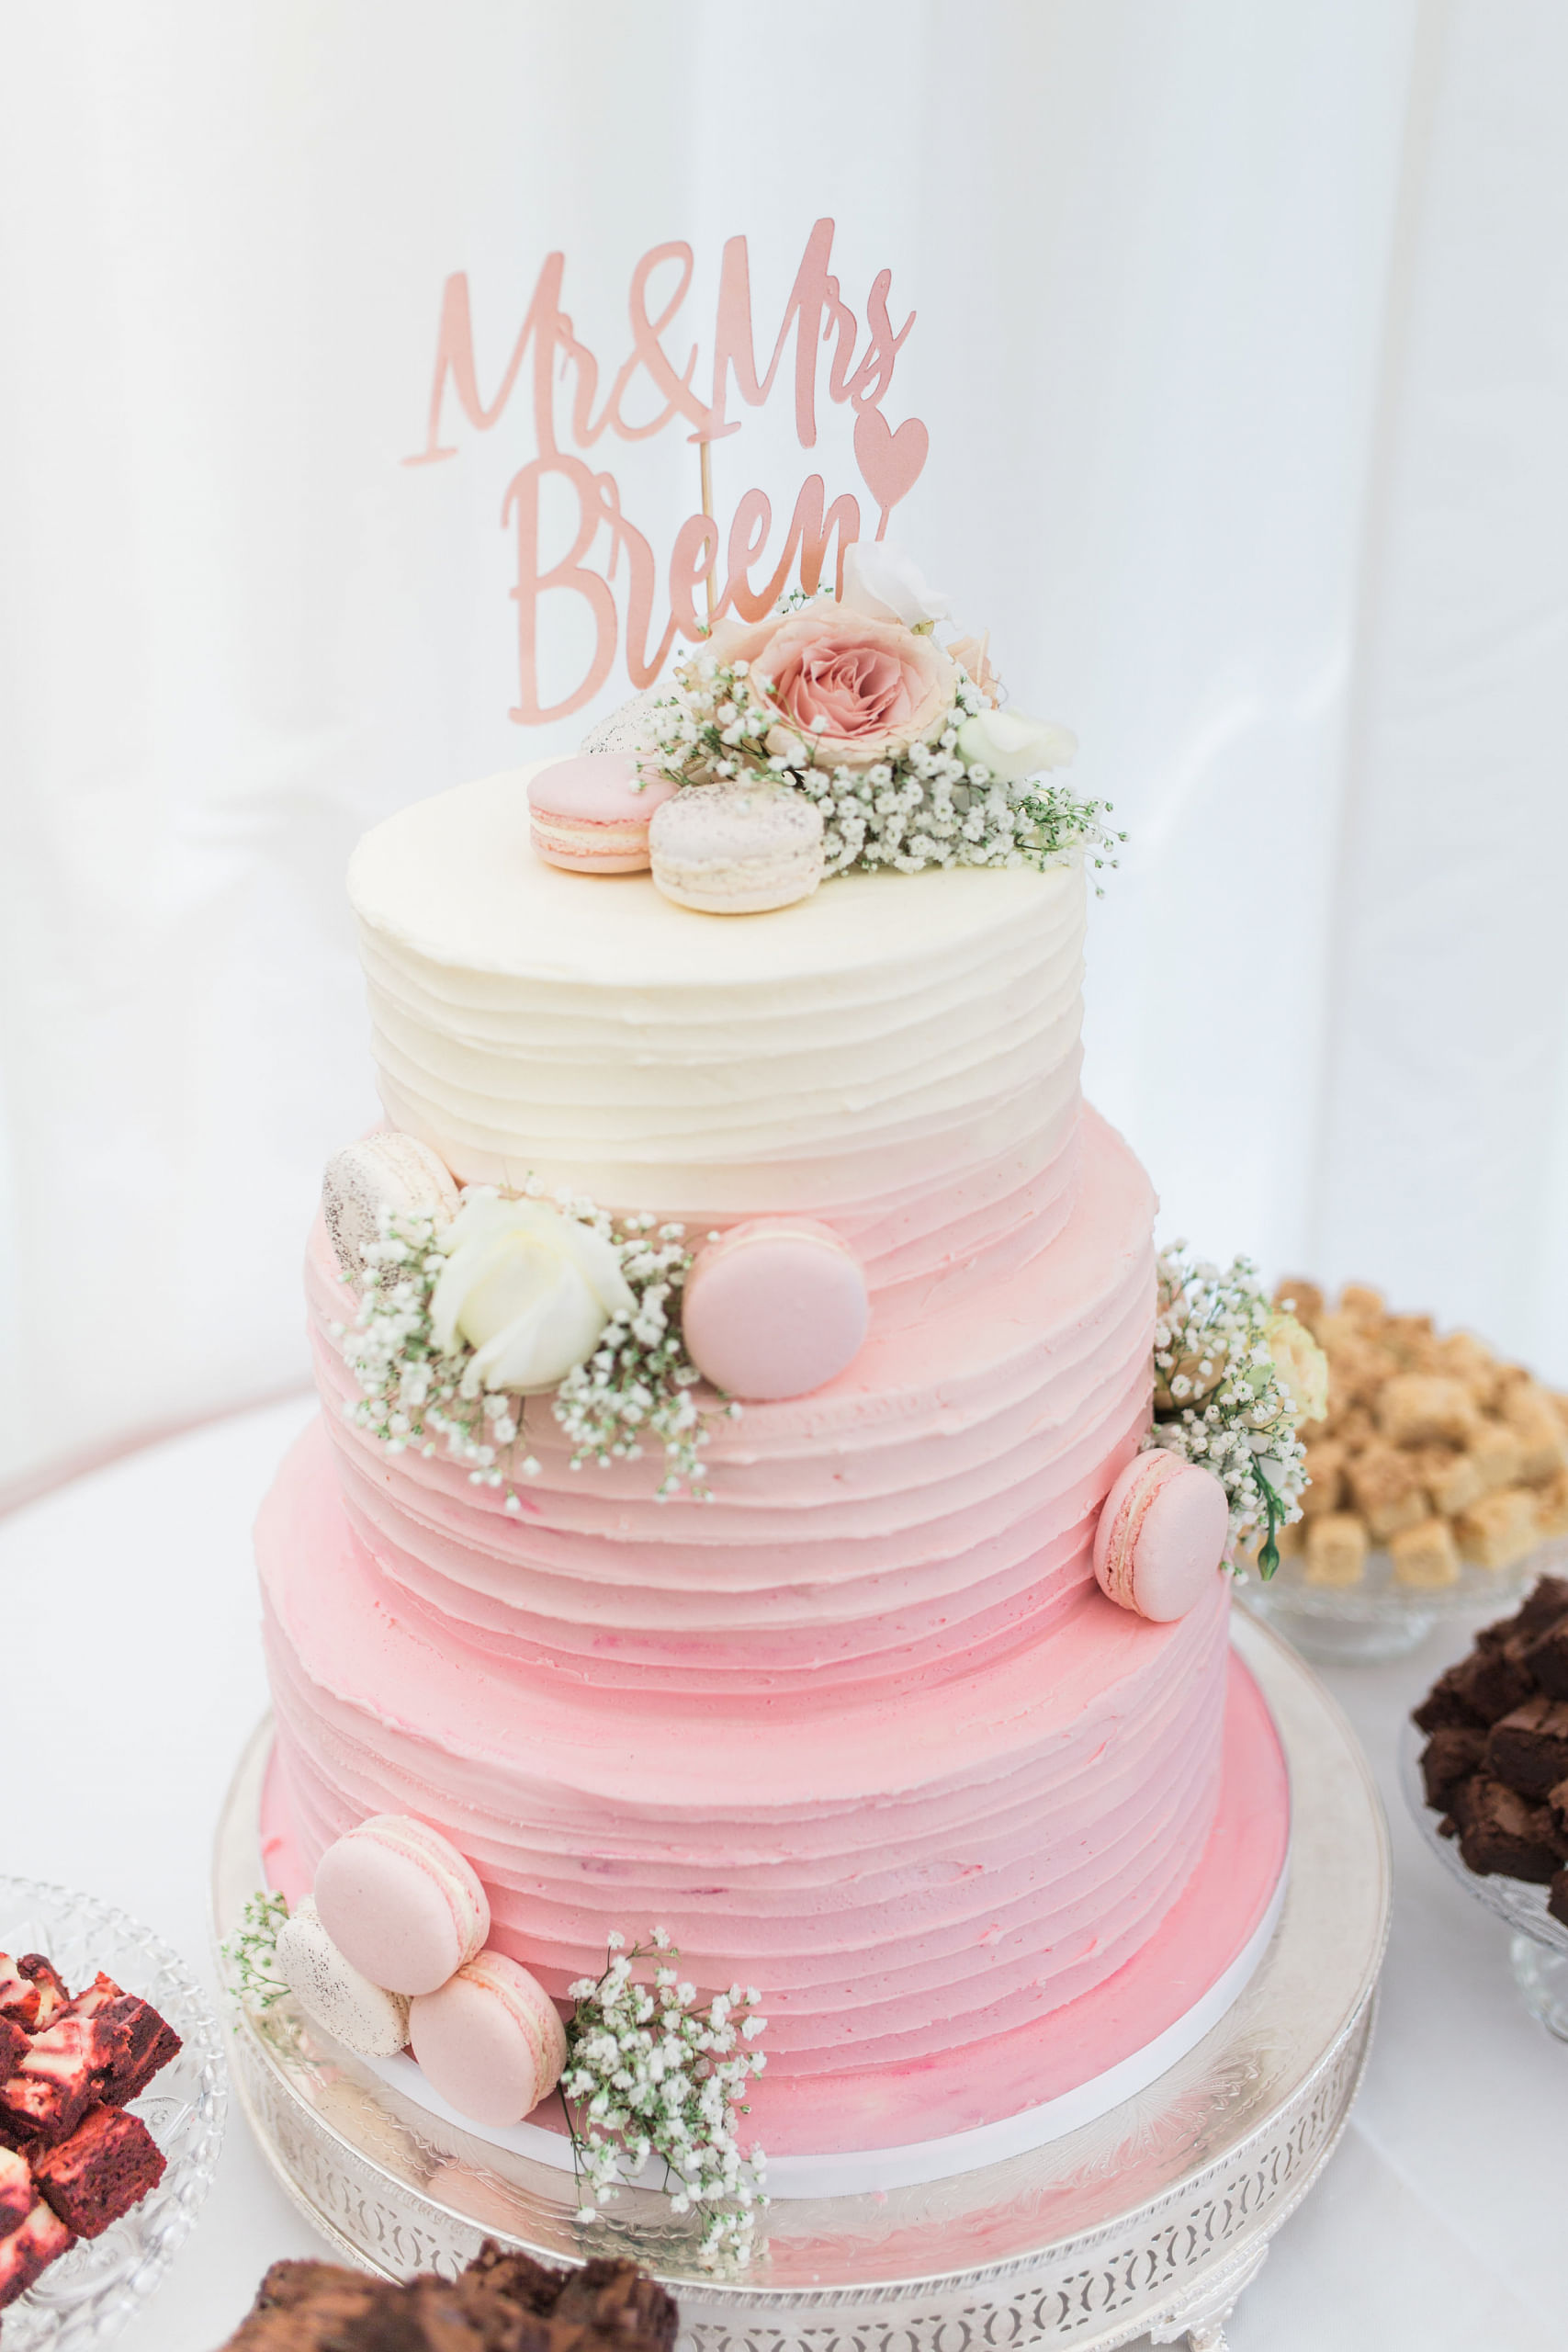 31+ Creative Wedding Cake Design to Inspire you for Your Own!